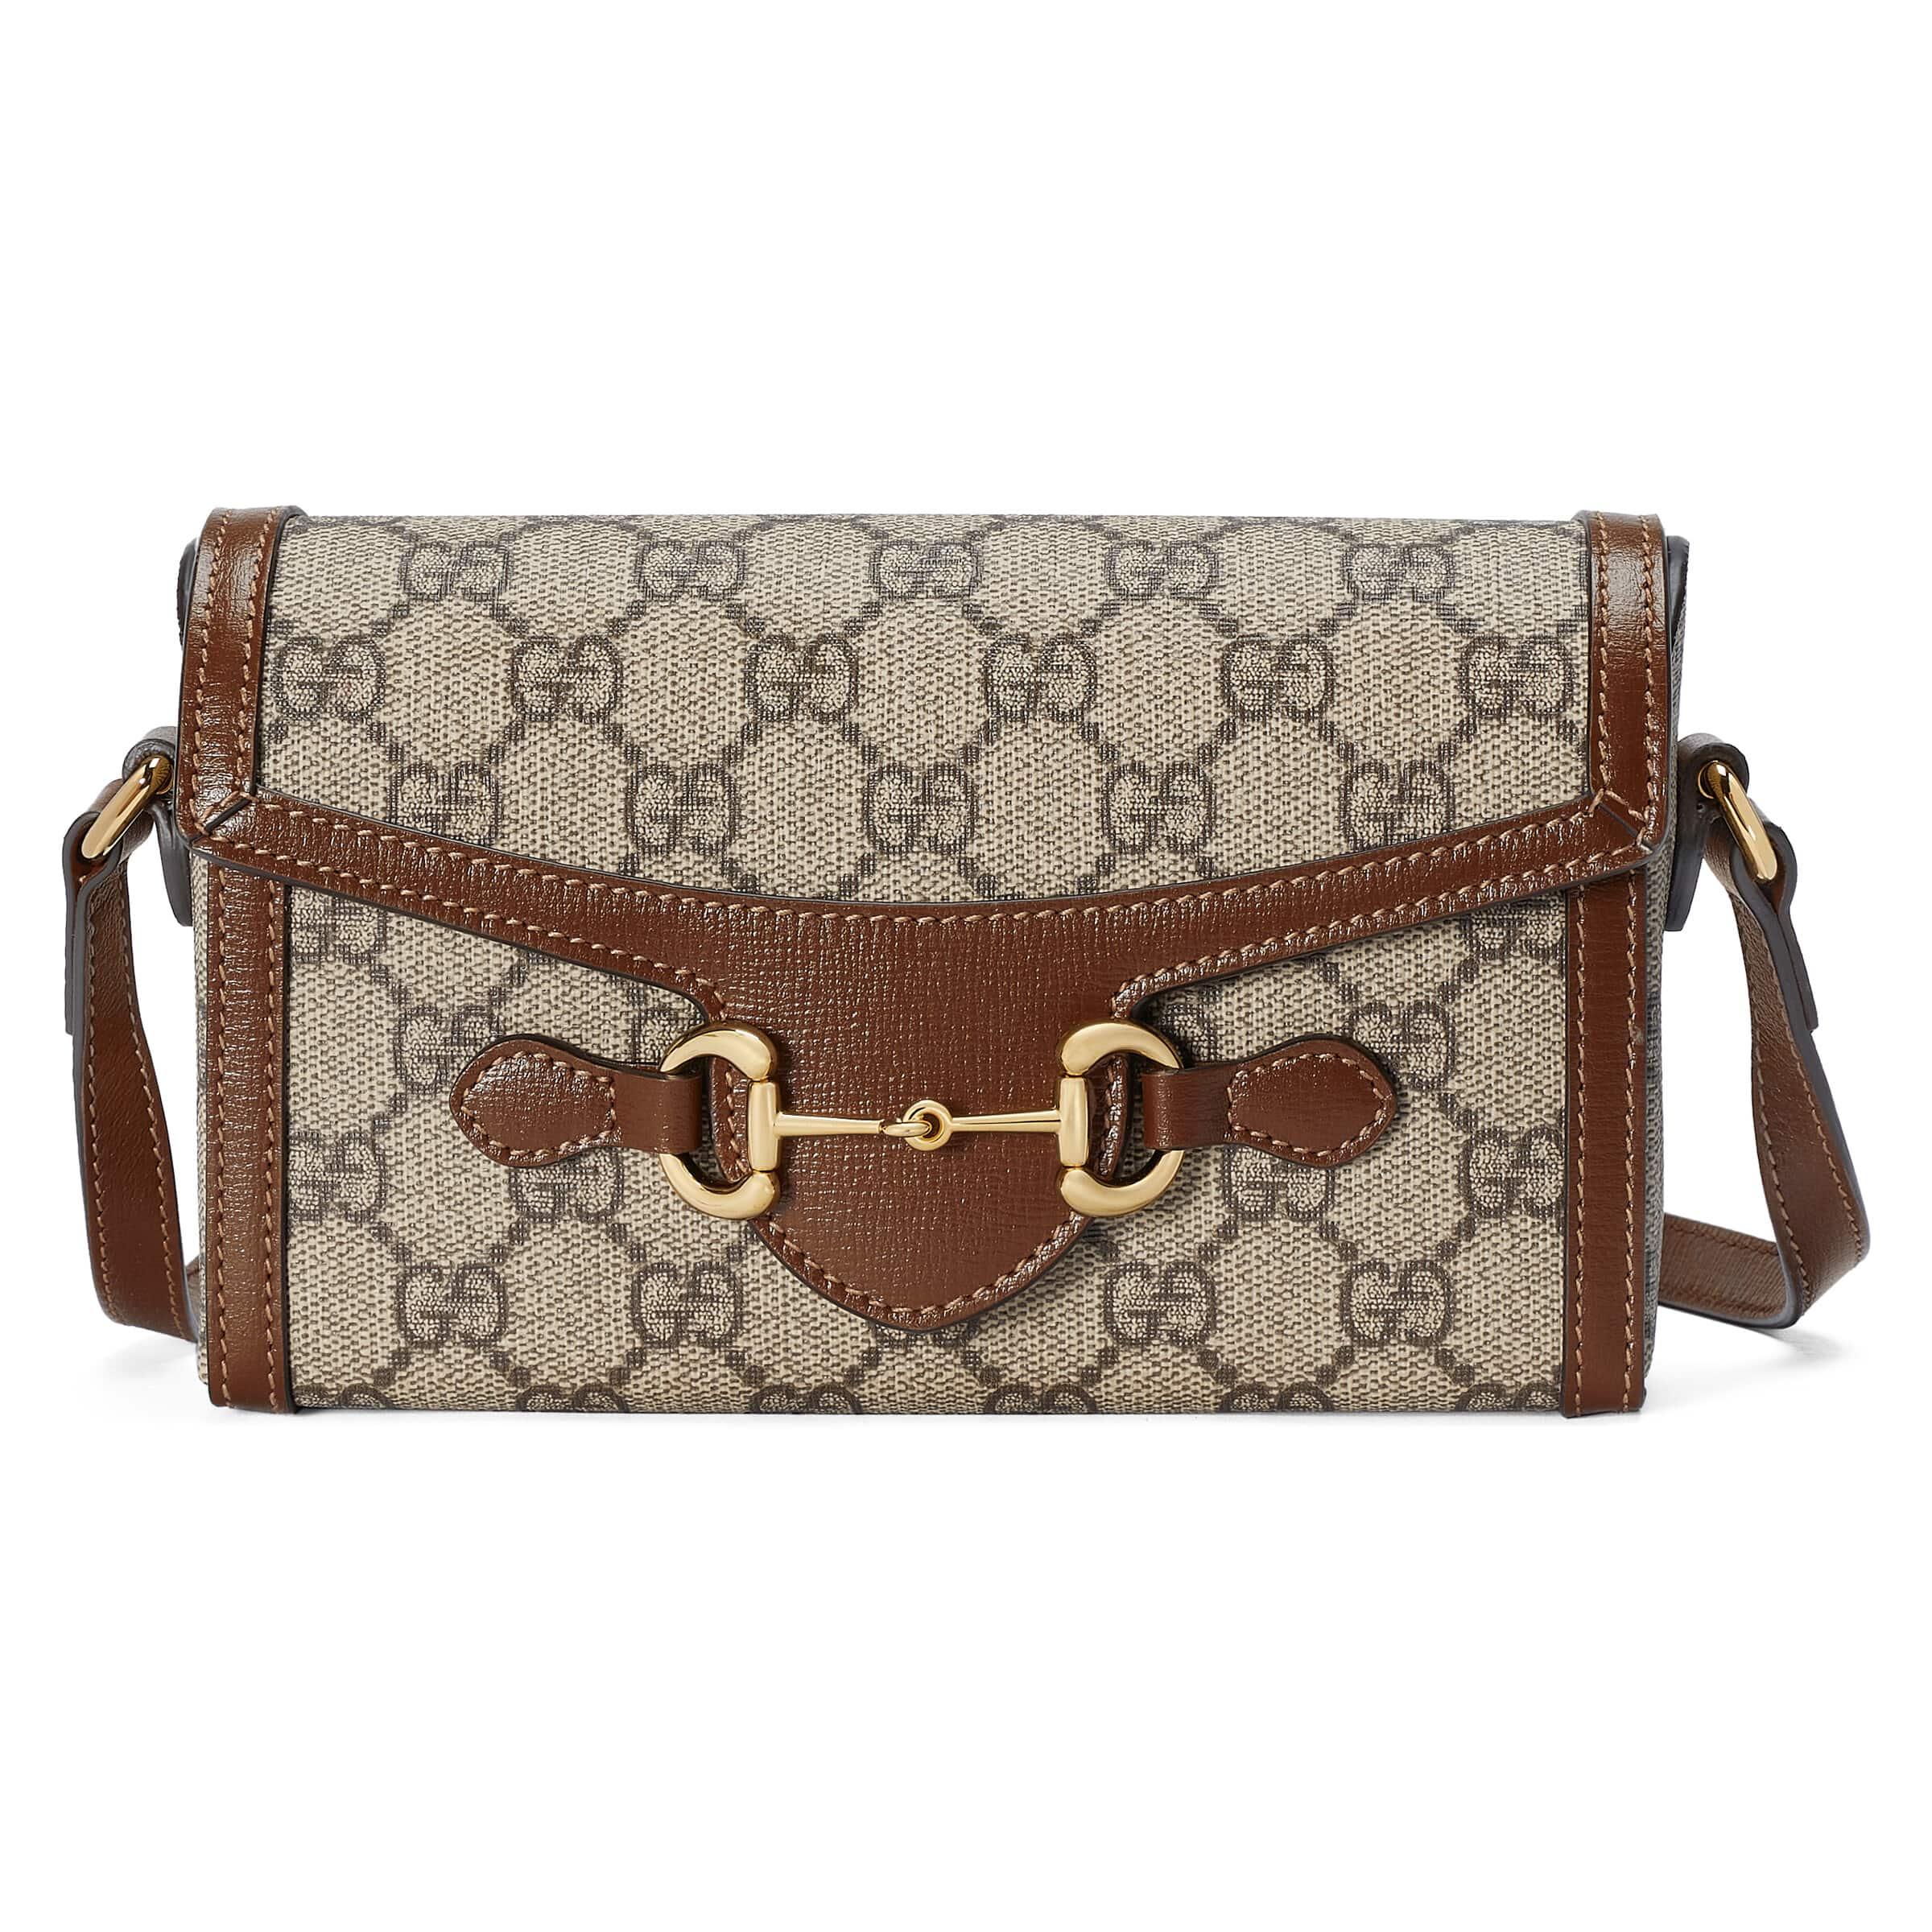 Gucci Horsebit 1955 Phone Bag  Microfiber lining with a suede